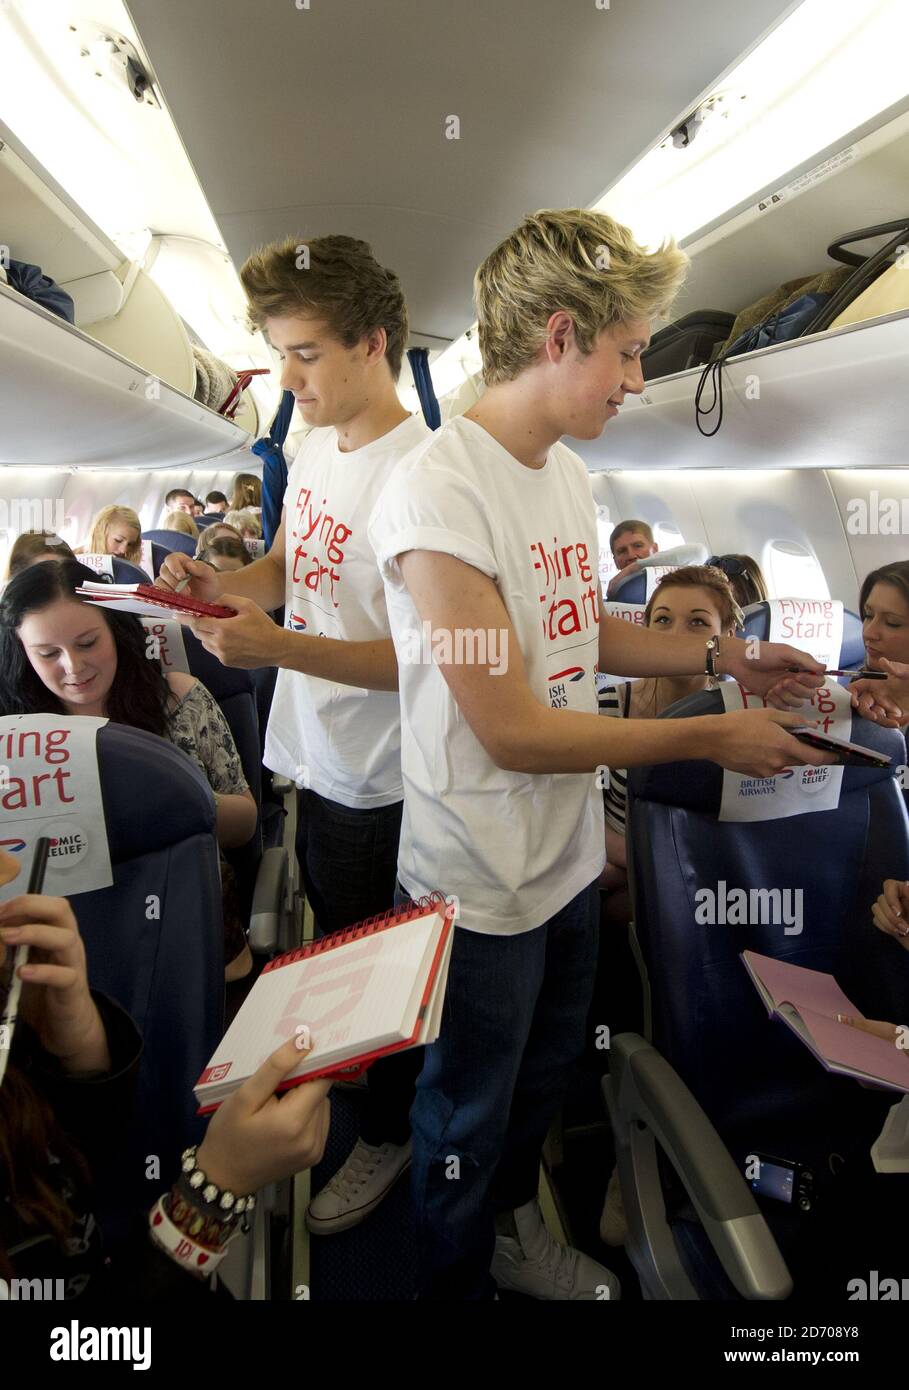 Liam Payne And Niall Horan Of One Direction Pictured On Board Flight Ba1d A Private Charter Flight From London To Manchester Hosted By The Band For Competition Winners Which Raised A 50 000